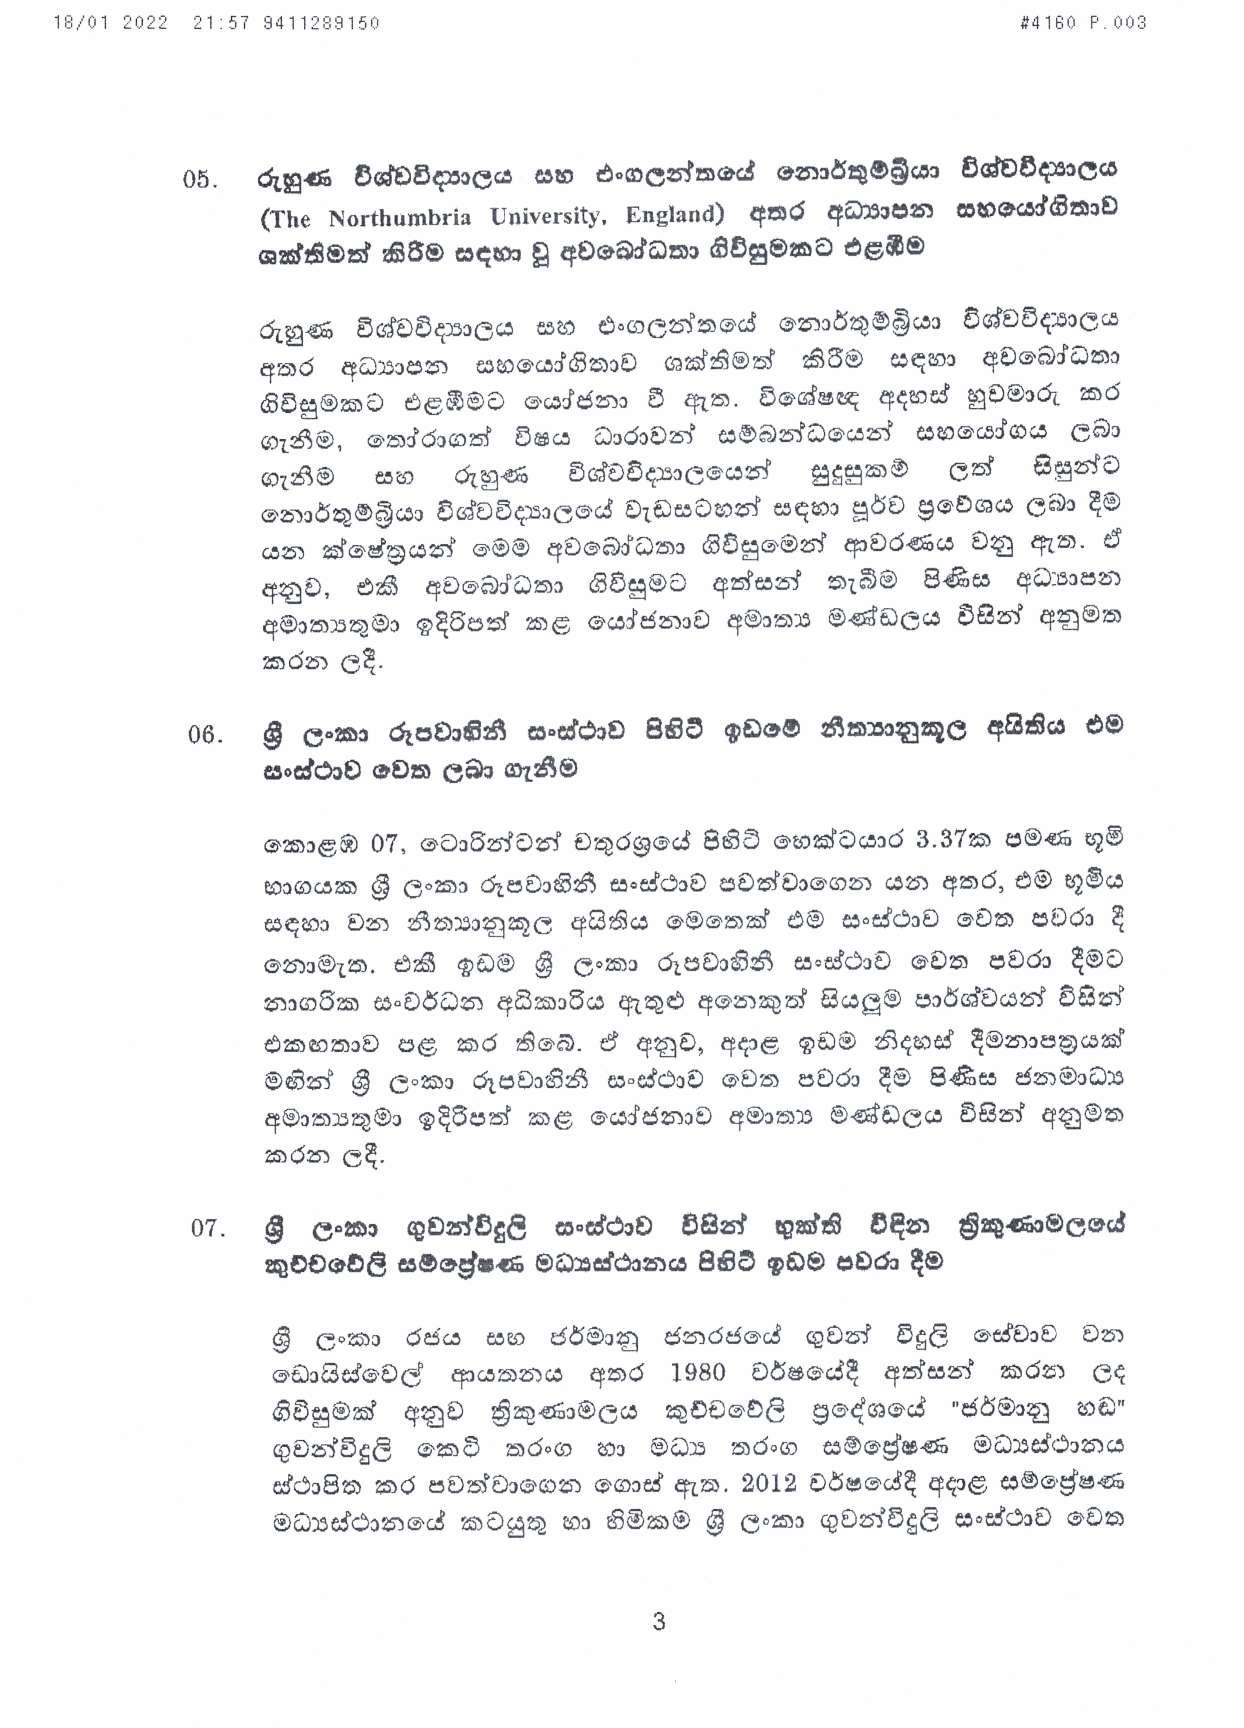 Cabinet Decision on 18.01.2022 page 003